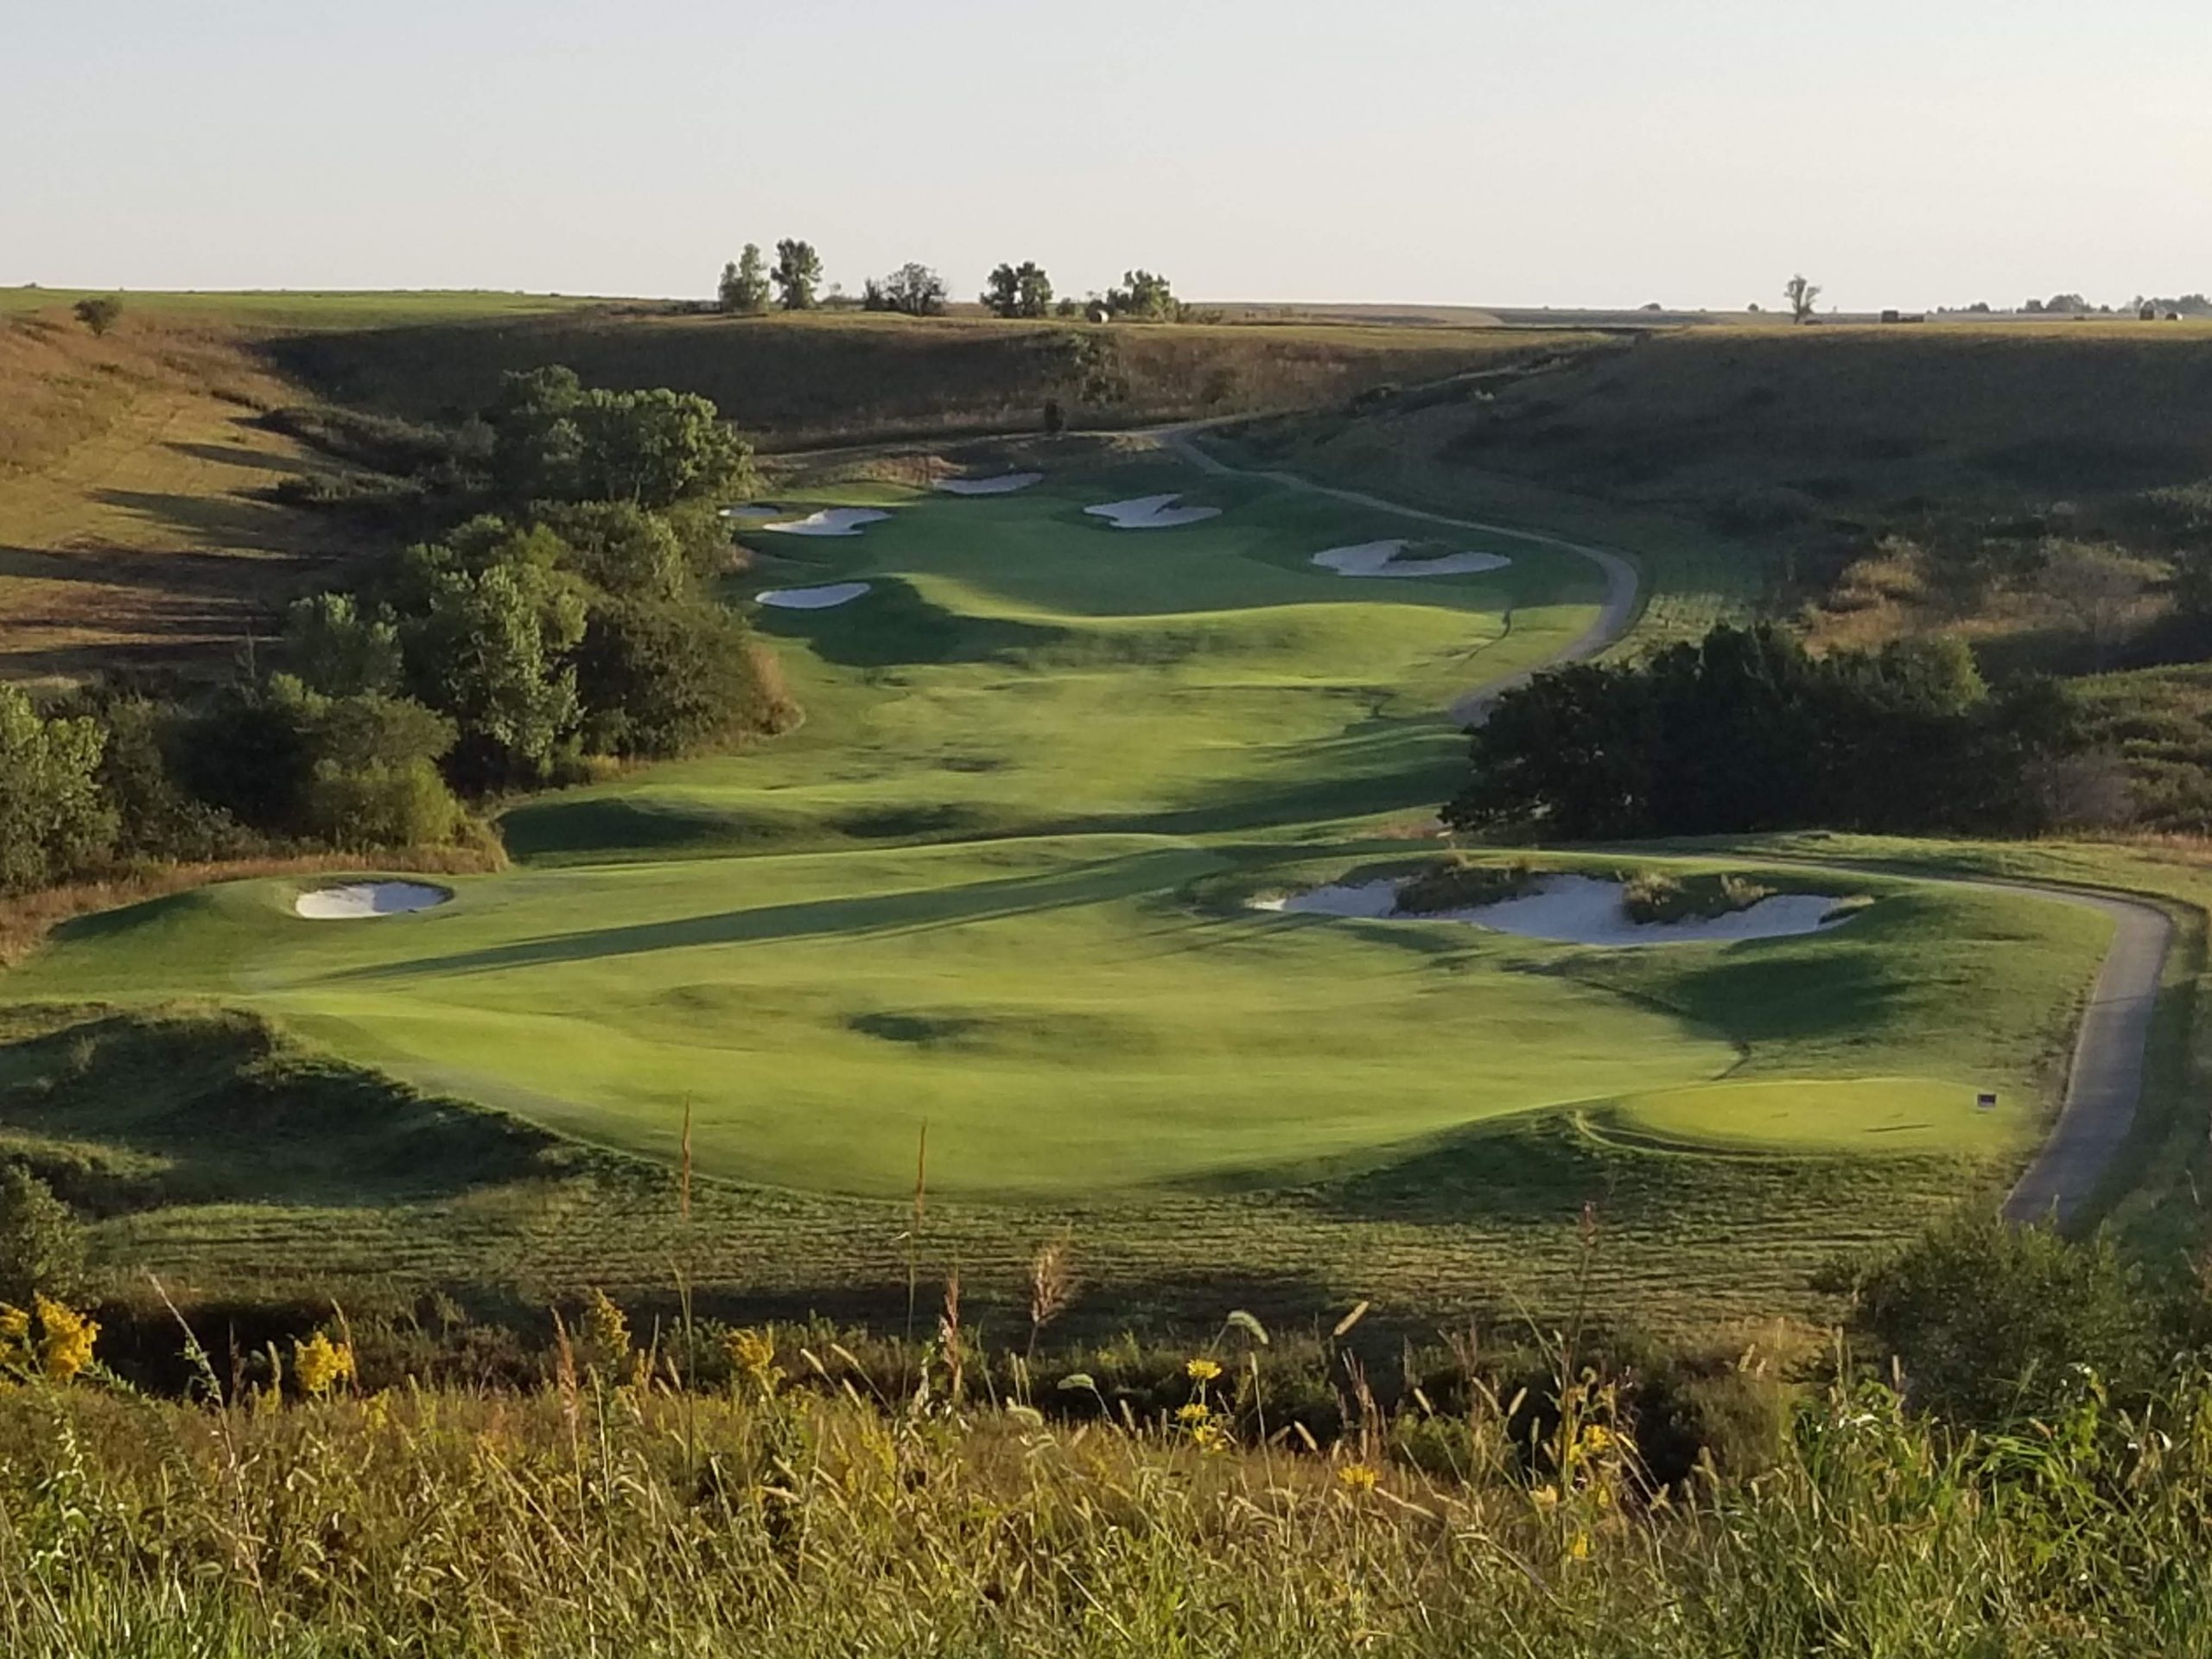 Overview of Colbert Hills Golf Course